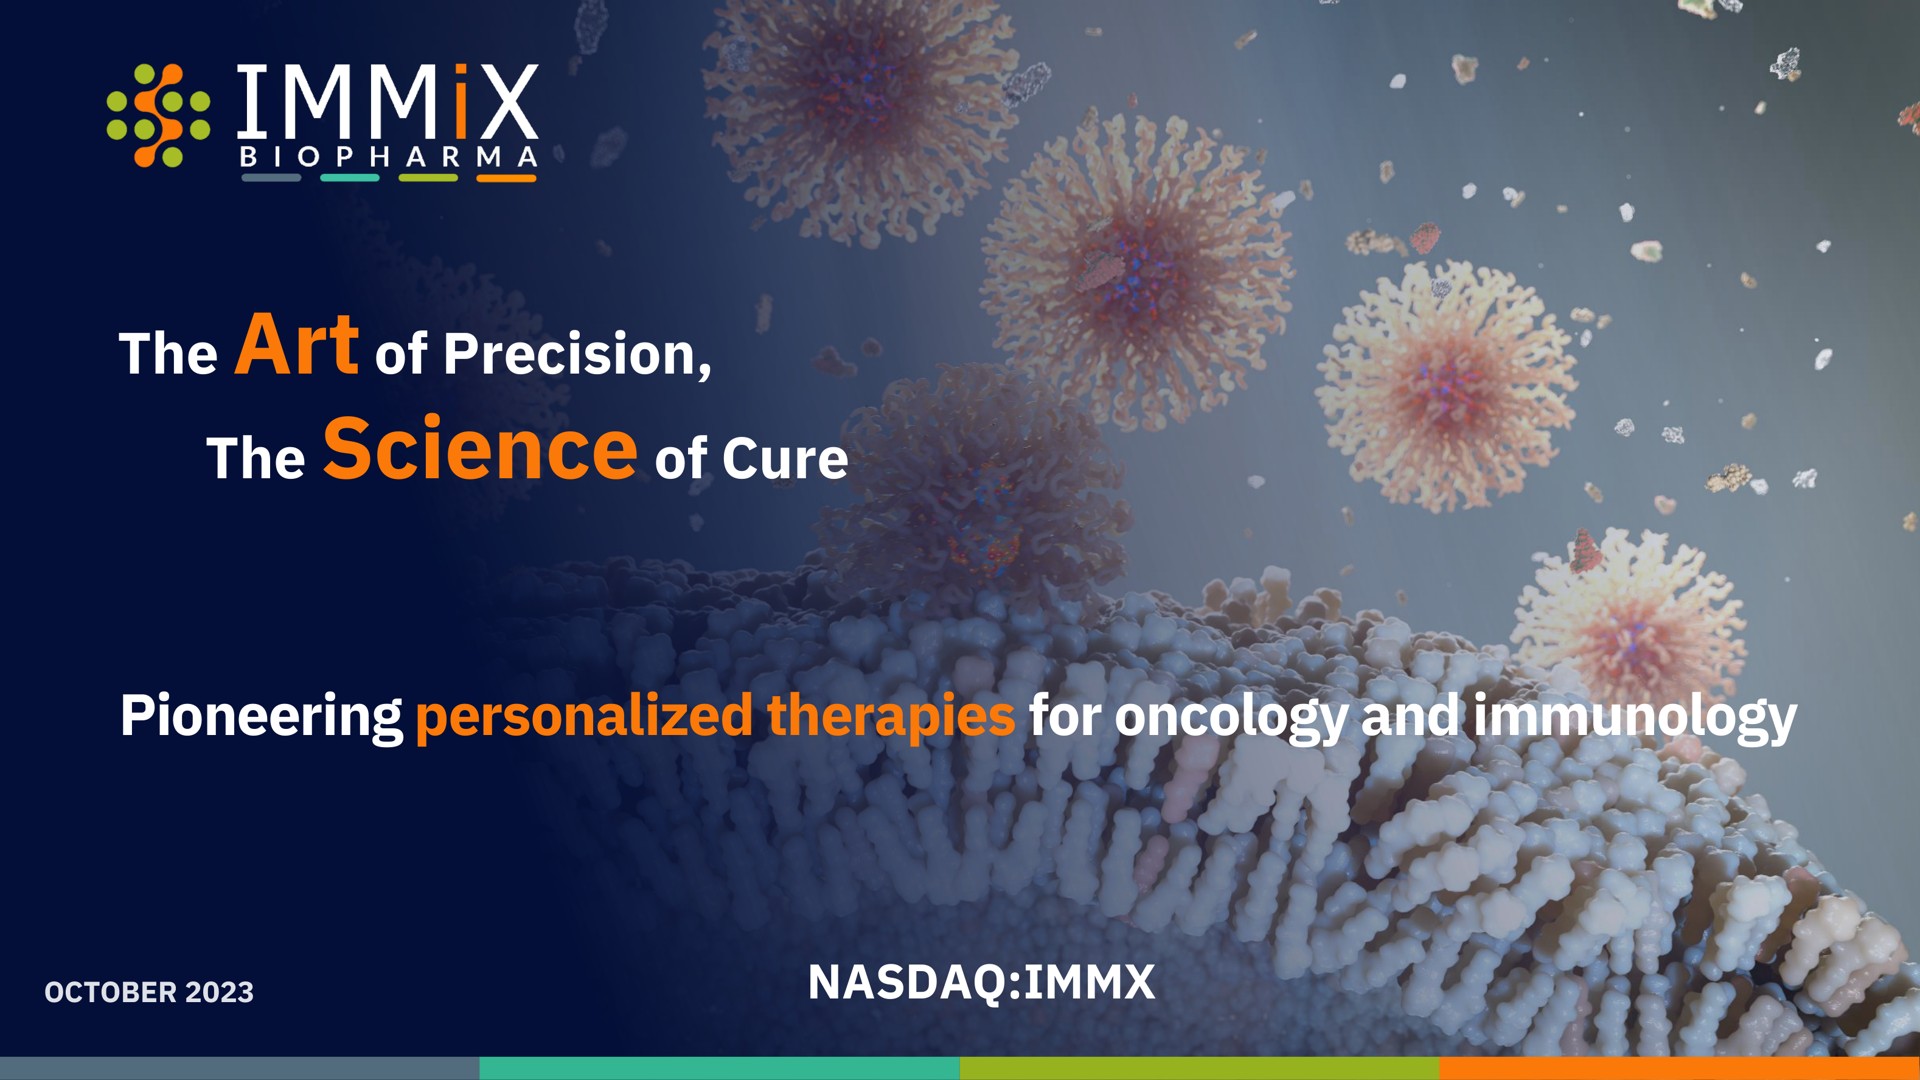 the art of precision the science of cure pioneering personalized therapies for oncology and immunology eel leek set be he pat | Immix Biopharma